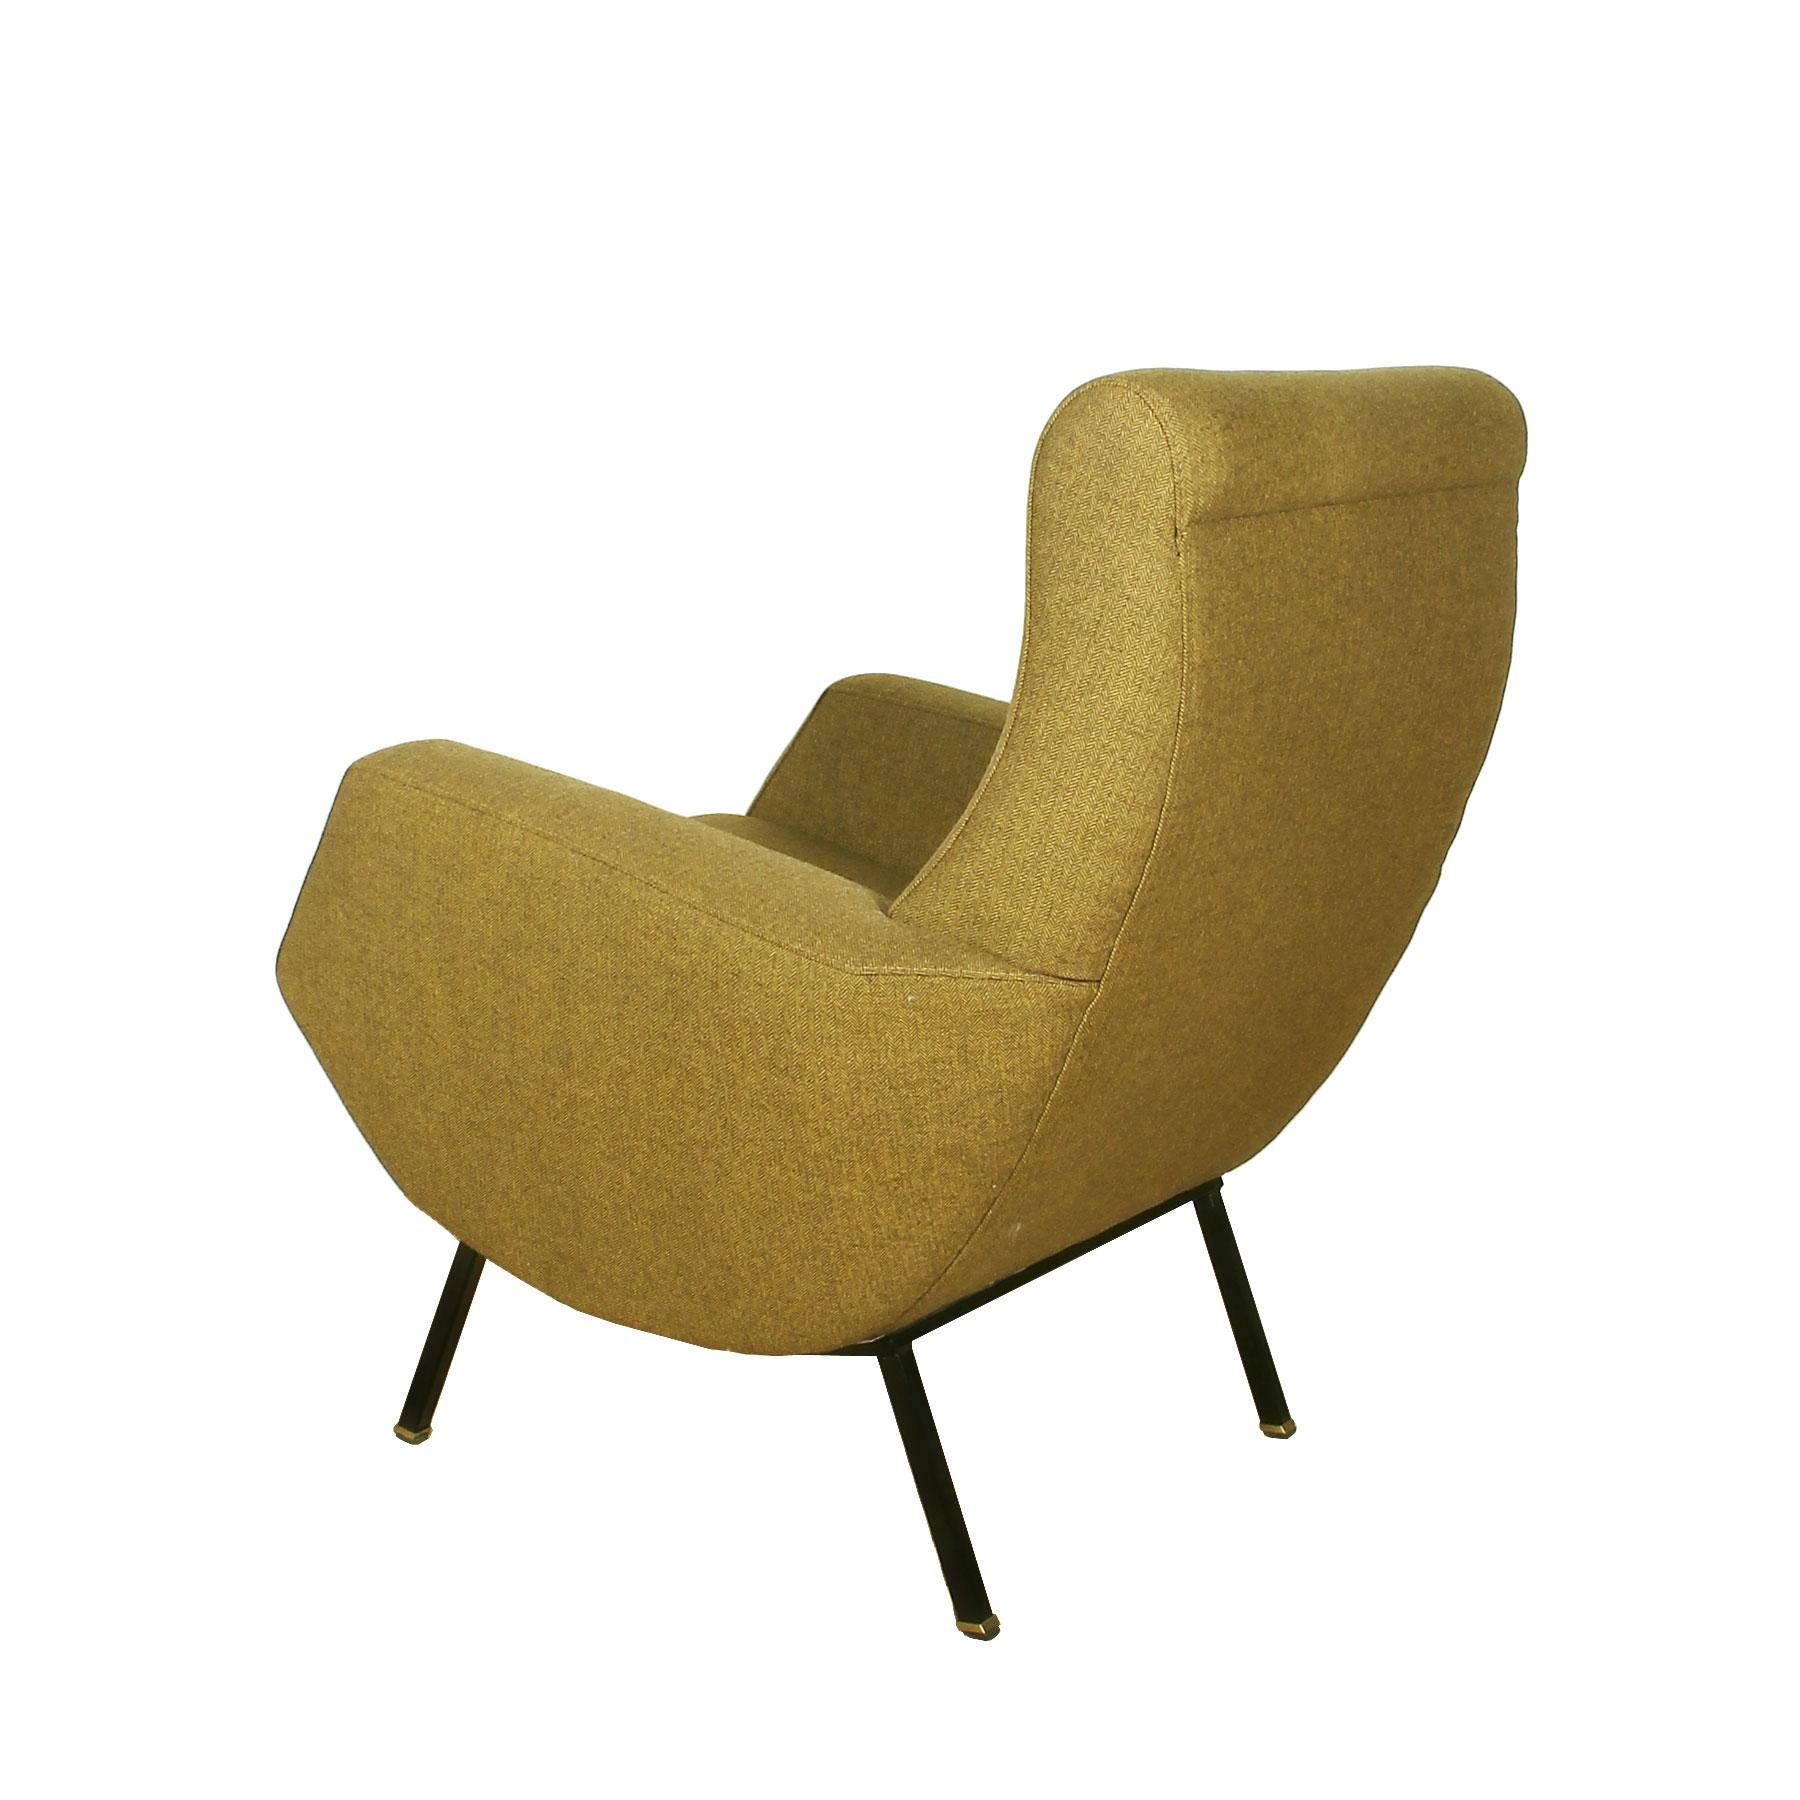 Brass Pair of Mid-Century Modern Armchairs in New Mottled Yellow Fabric - Italy, 1960s For Sale